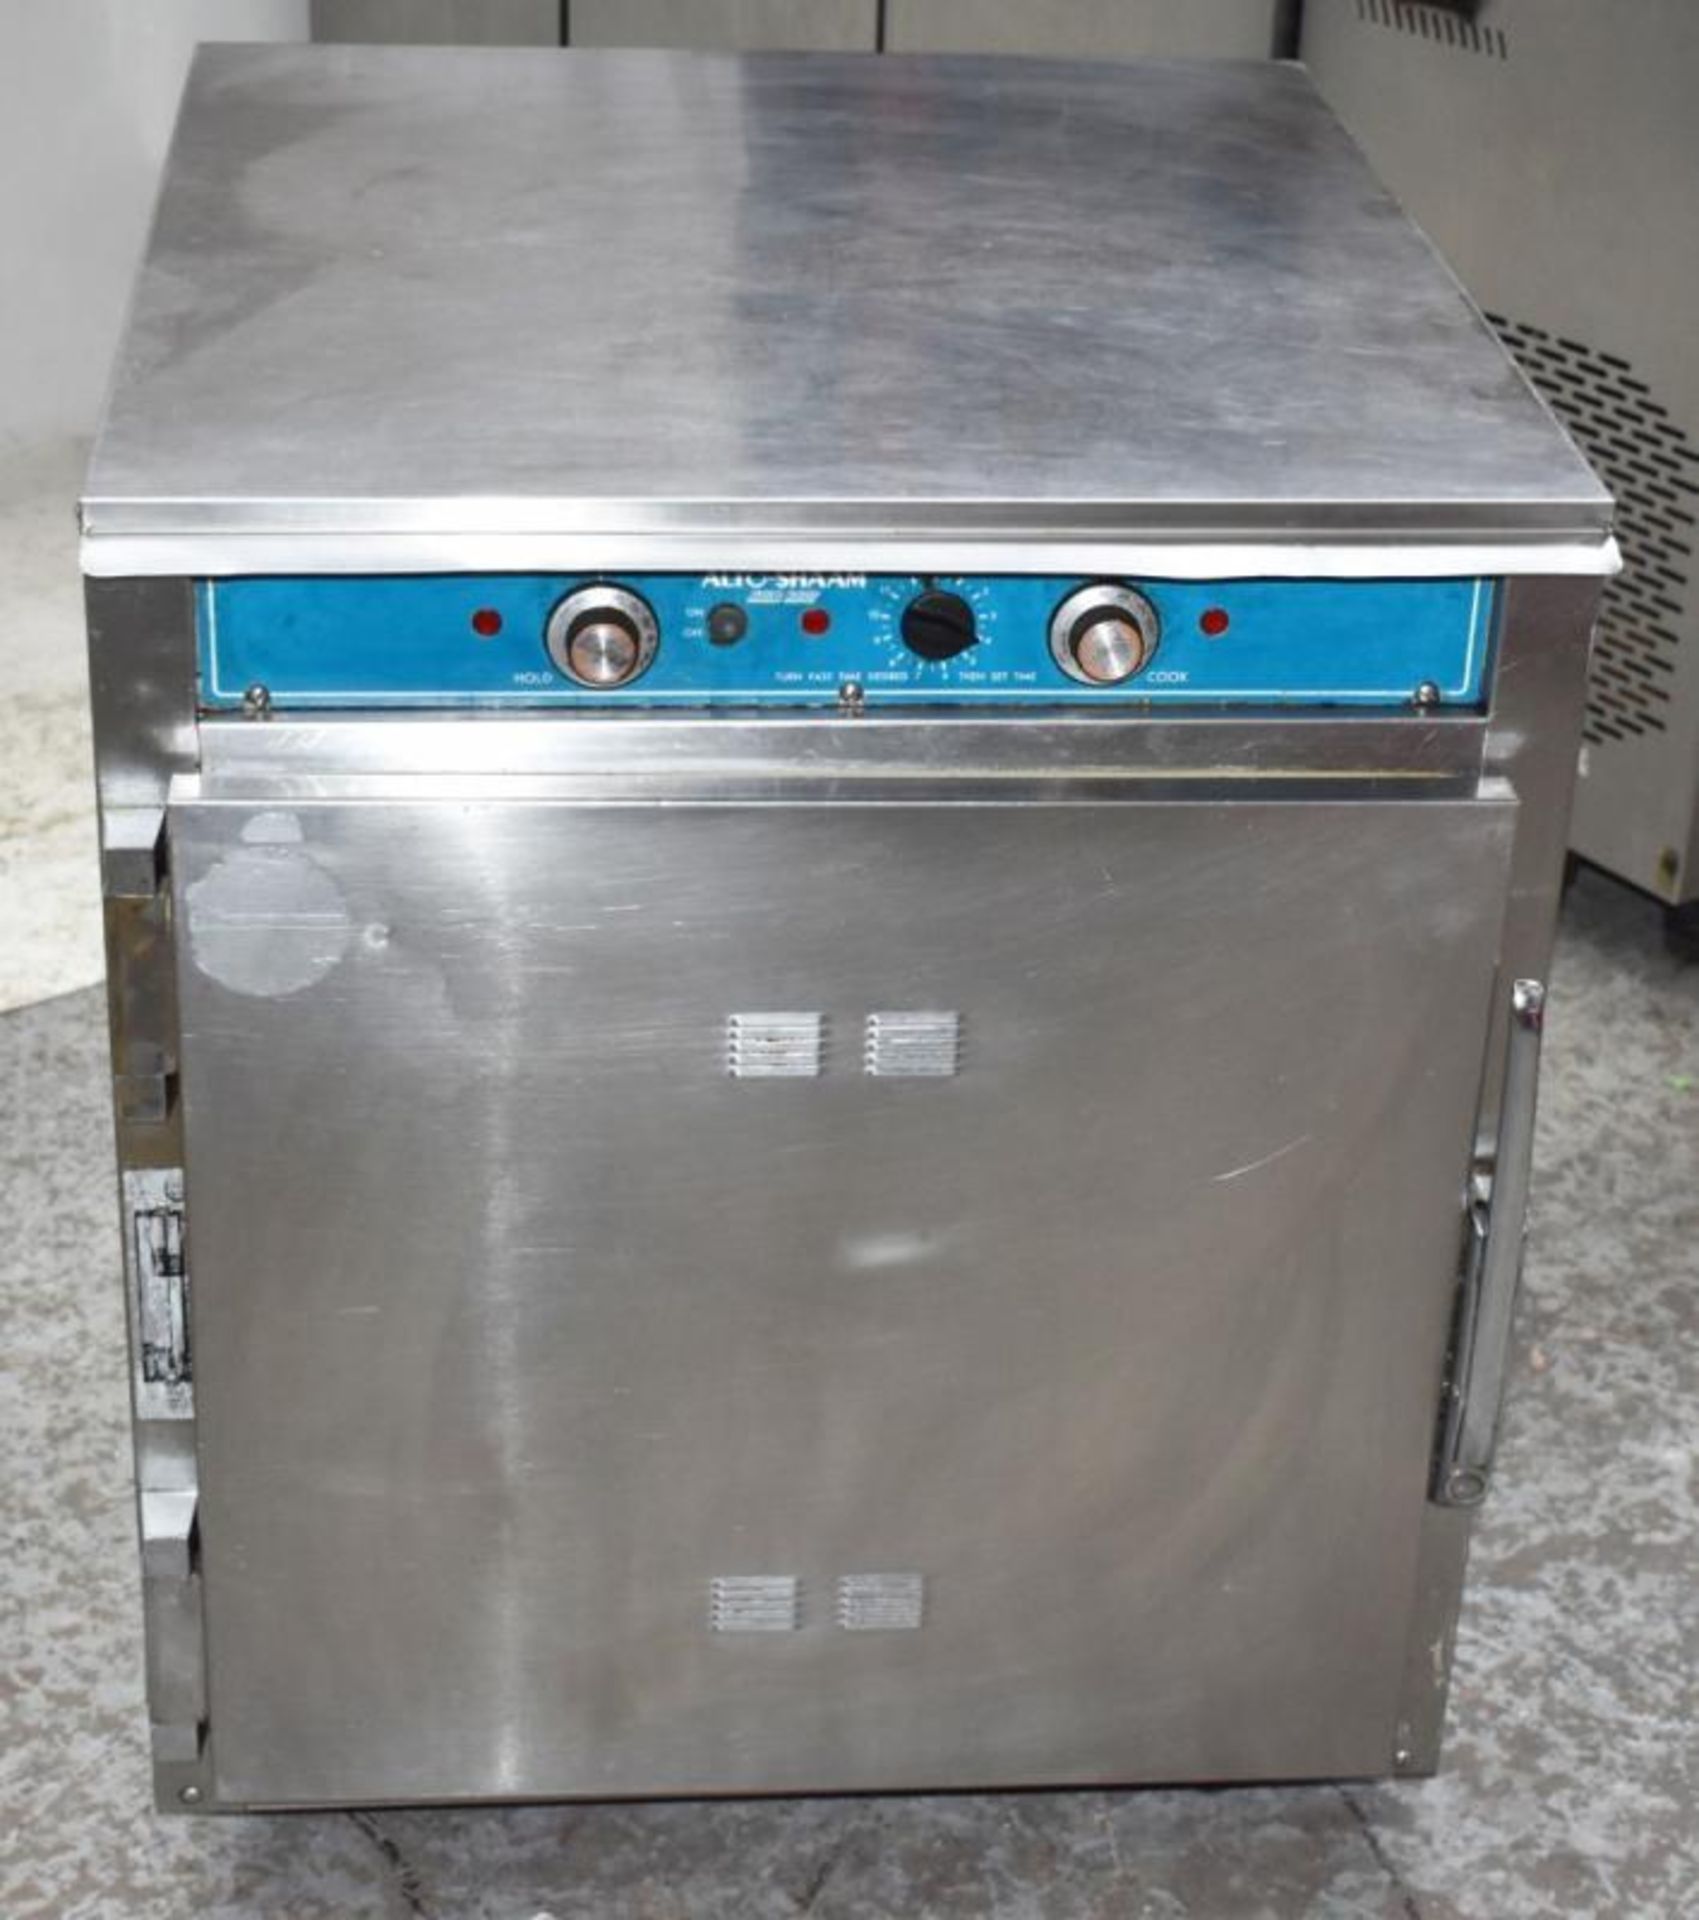 1 x Auto-Shaam Halo Heat Cook and Hold Food Cabinet - 240v - H76 x W65 x D75 cms - CL459 - Ref248 - - Image 3 of 7